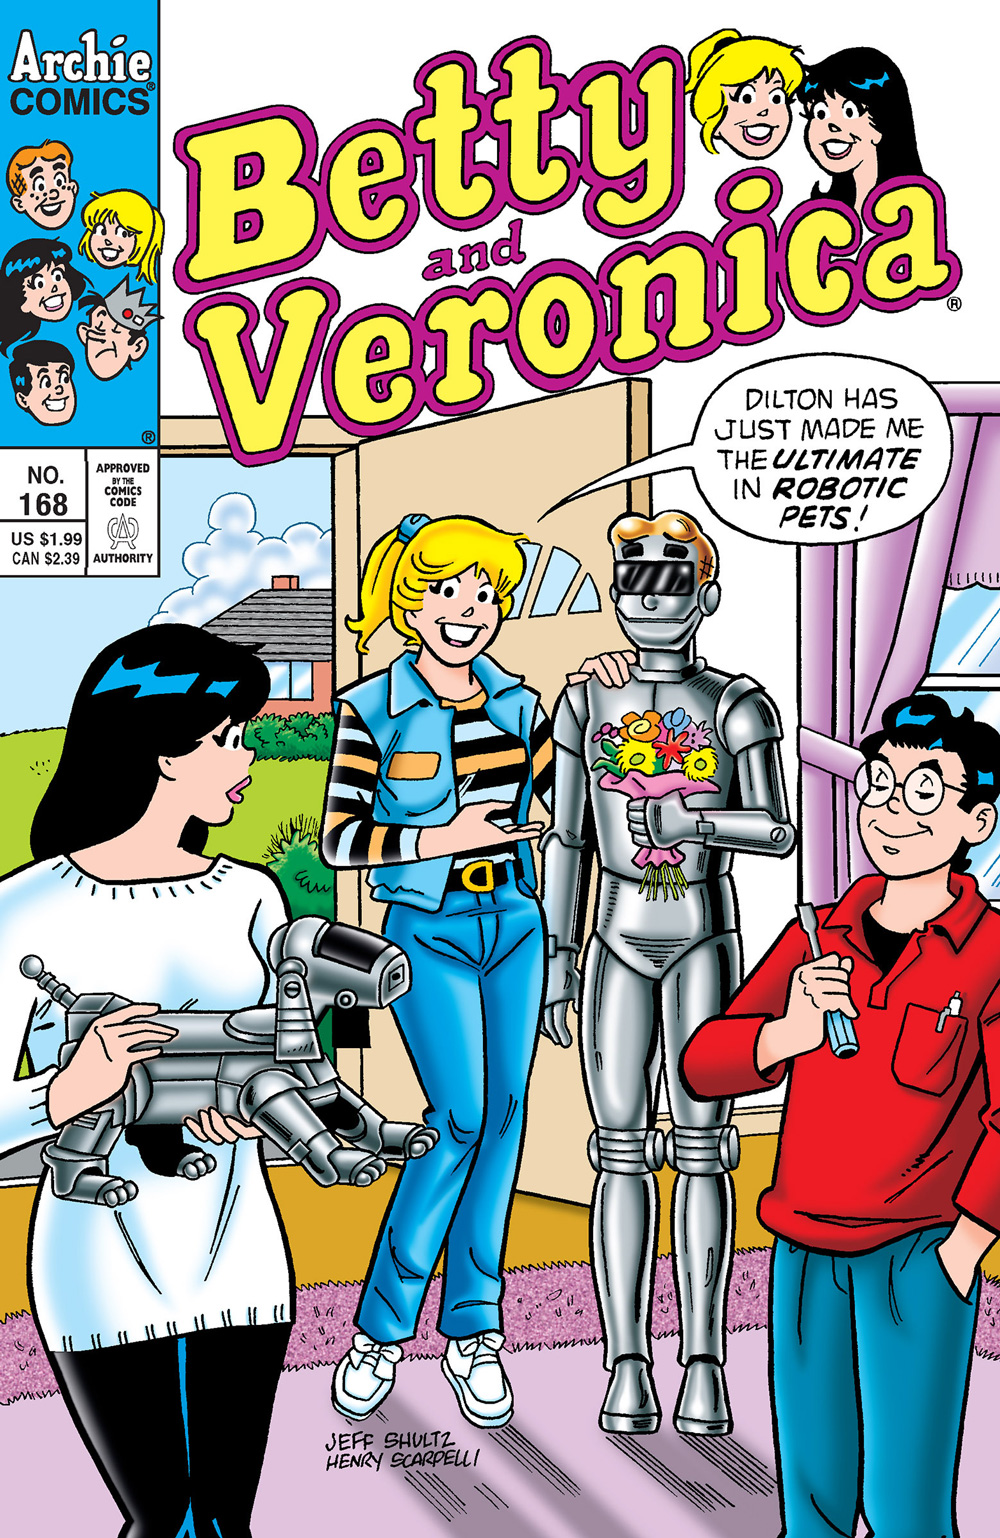 Betty stands next to a robot duplicate of Archie, holding a bouquet of flowers, and she tells Veronica that Dilton made her the ultimate robotic pet. Veronica scowls at her, holding a robot dog. Dilton stands off to the side with a proud smirk, having just given both of them there robots.